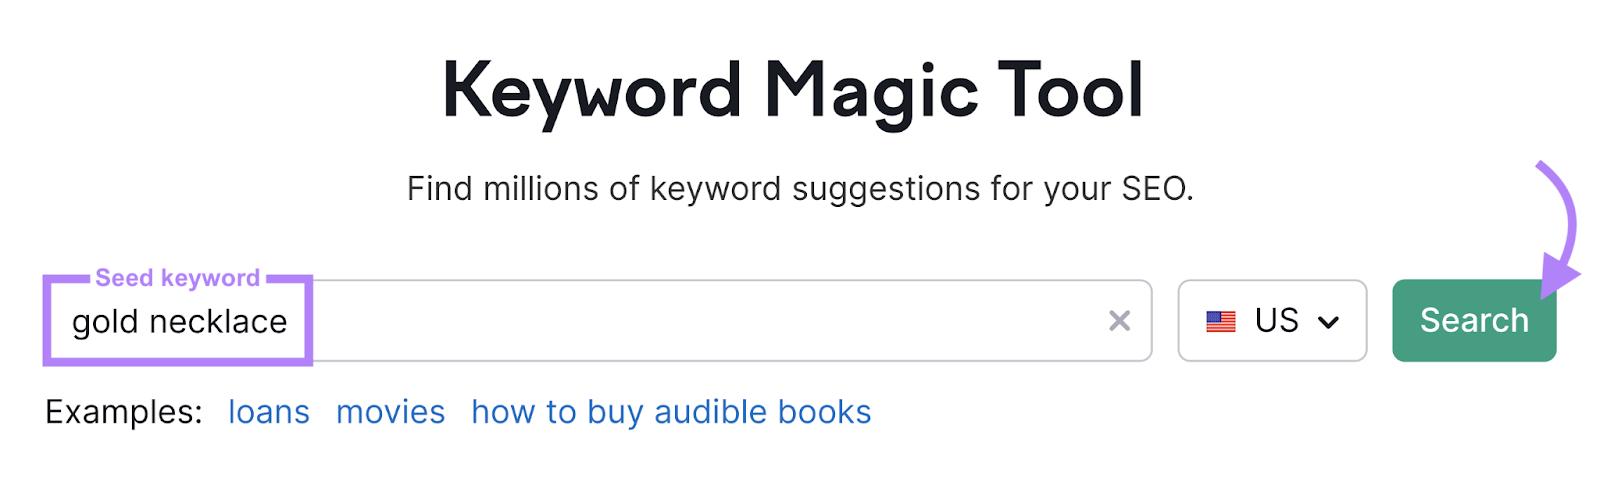 "gold necklace" typed in the search bar for the Keyword Magic Tool. The term is labeled "Seed keyword."